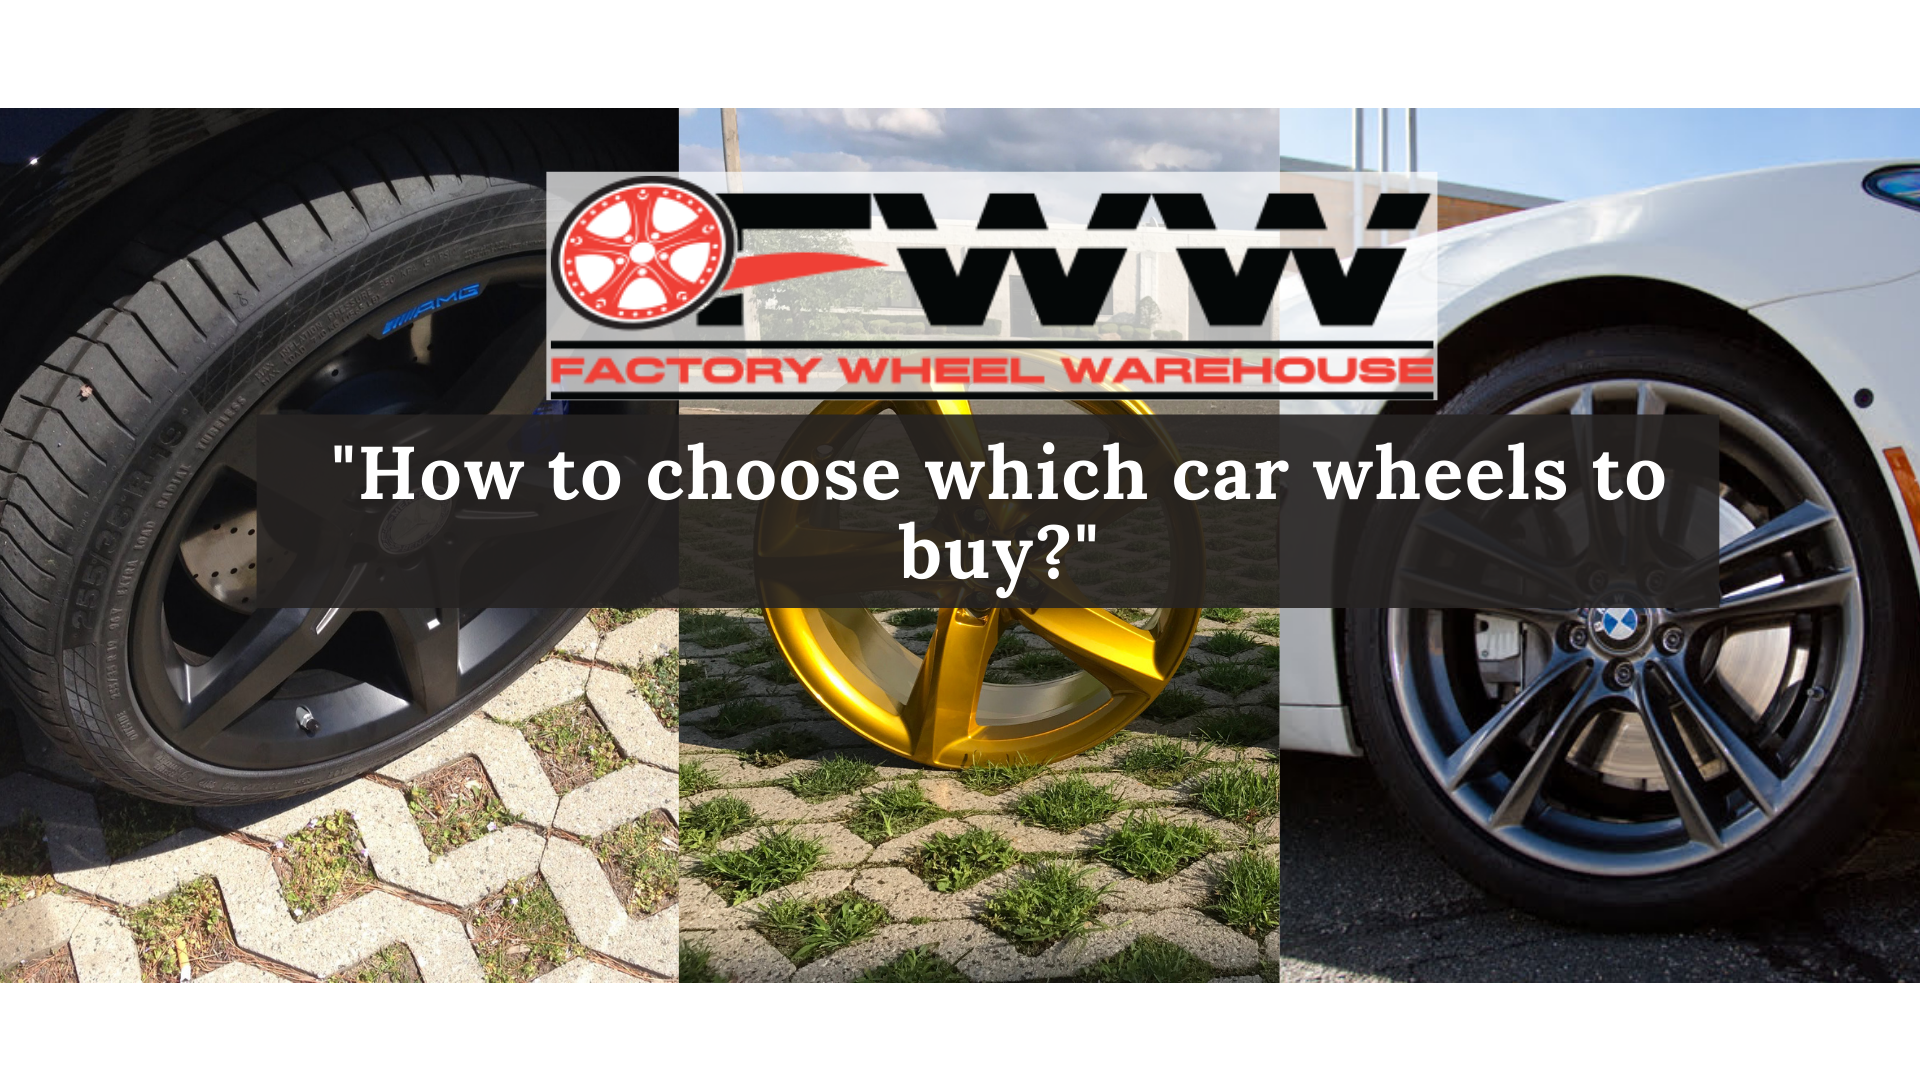 How to choose which car wheels to buy?